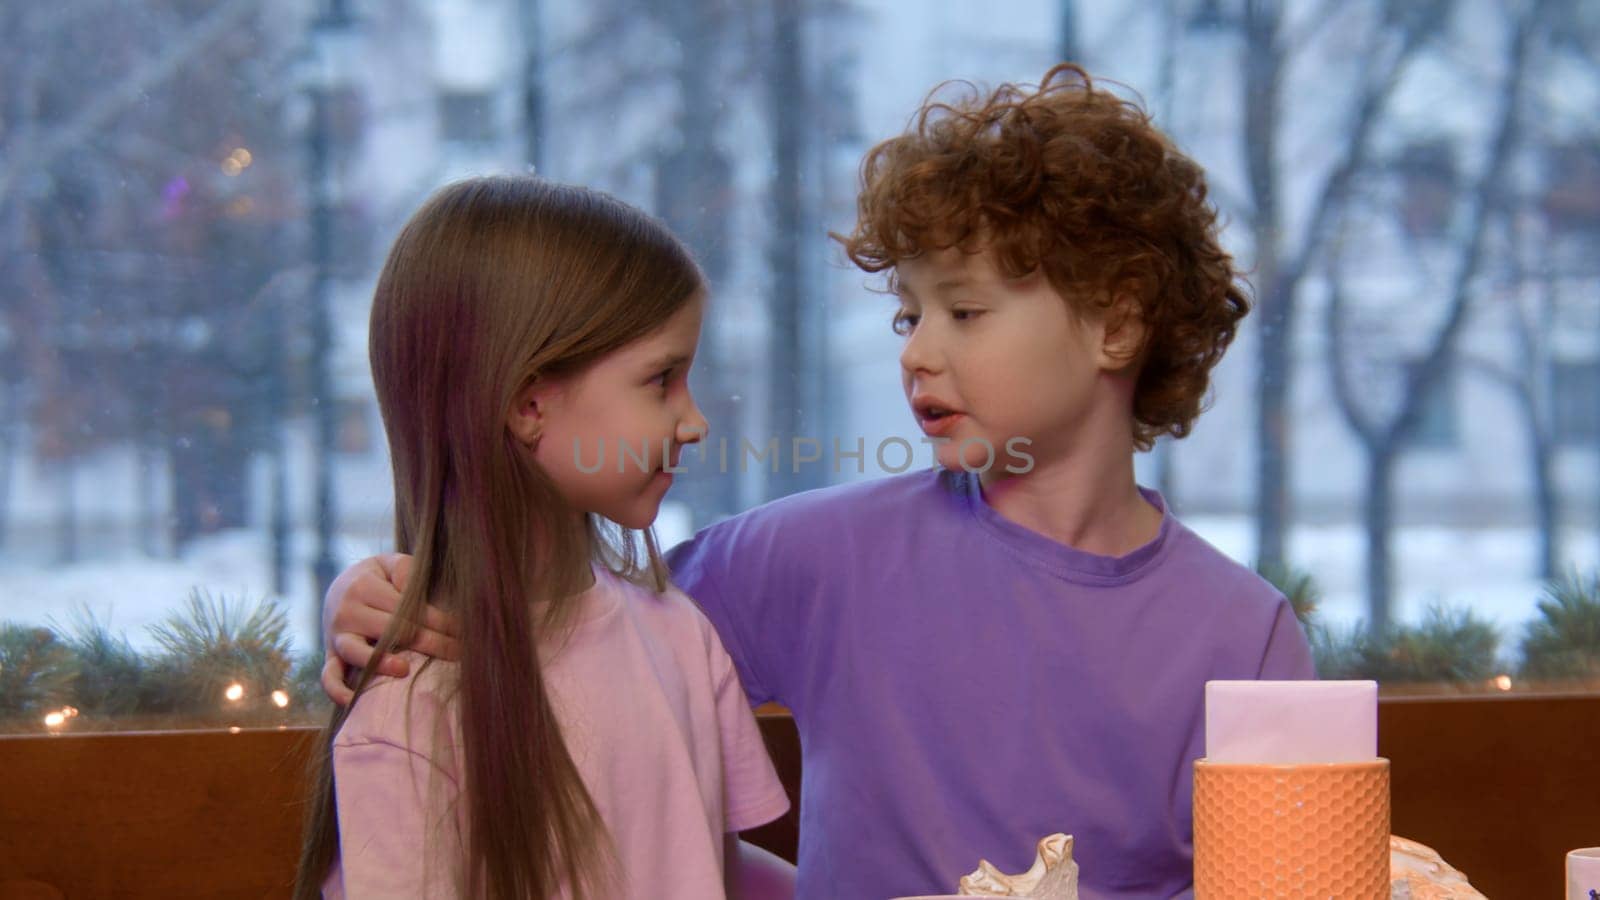 Children sitting together at a table in a restaurant. Stock footage. Brother with red curly hair putting ihs arm around the shoulders of her cute sister. by Mediawhalestock